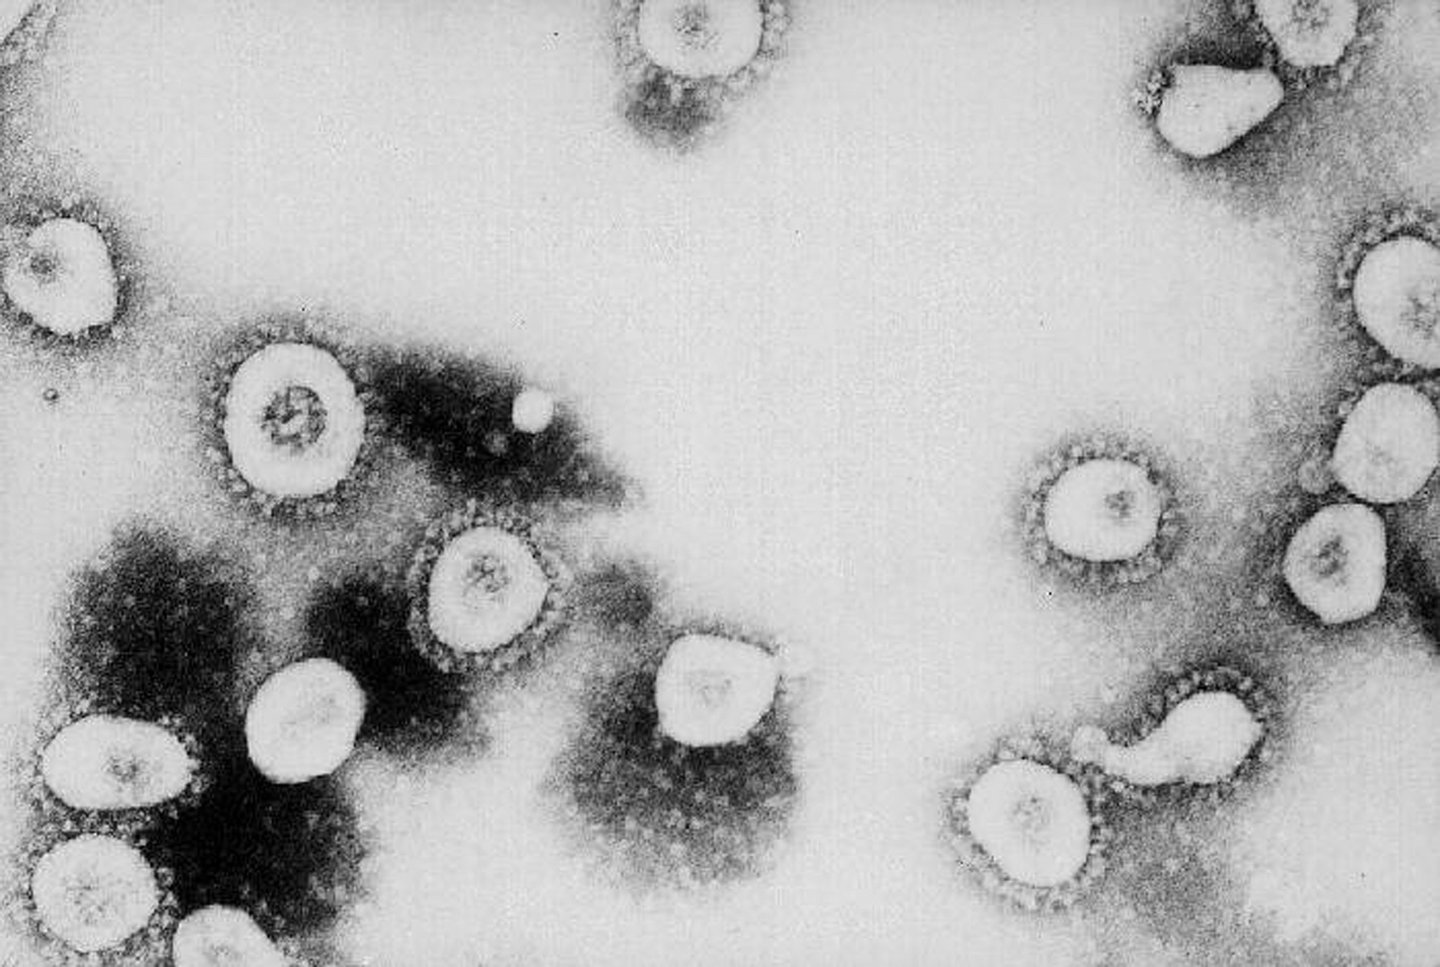 ATLANTA, GA - UNDATED:  This undated handout photo from the Centers for Disease Control and Prevention (CDC) shows a microscopic view of the Coronavirus at the CDC in Atlanta, Georgia. According to the CDC the virus that causes Severe Acute Respiratory Syndrome (SARS) might be a "previously unrecognized virus from the Coronavirus family."  (Photo by CDC/Getty Images)